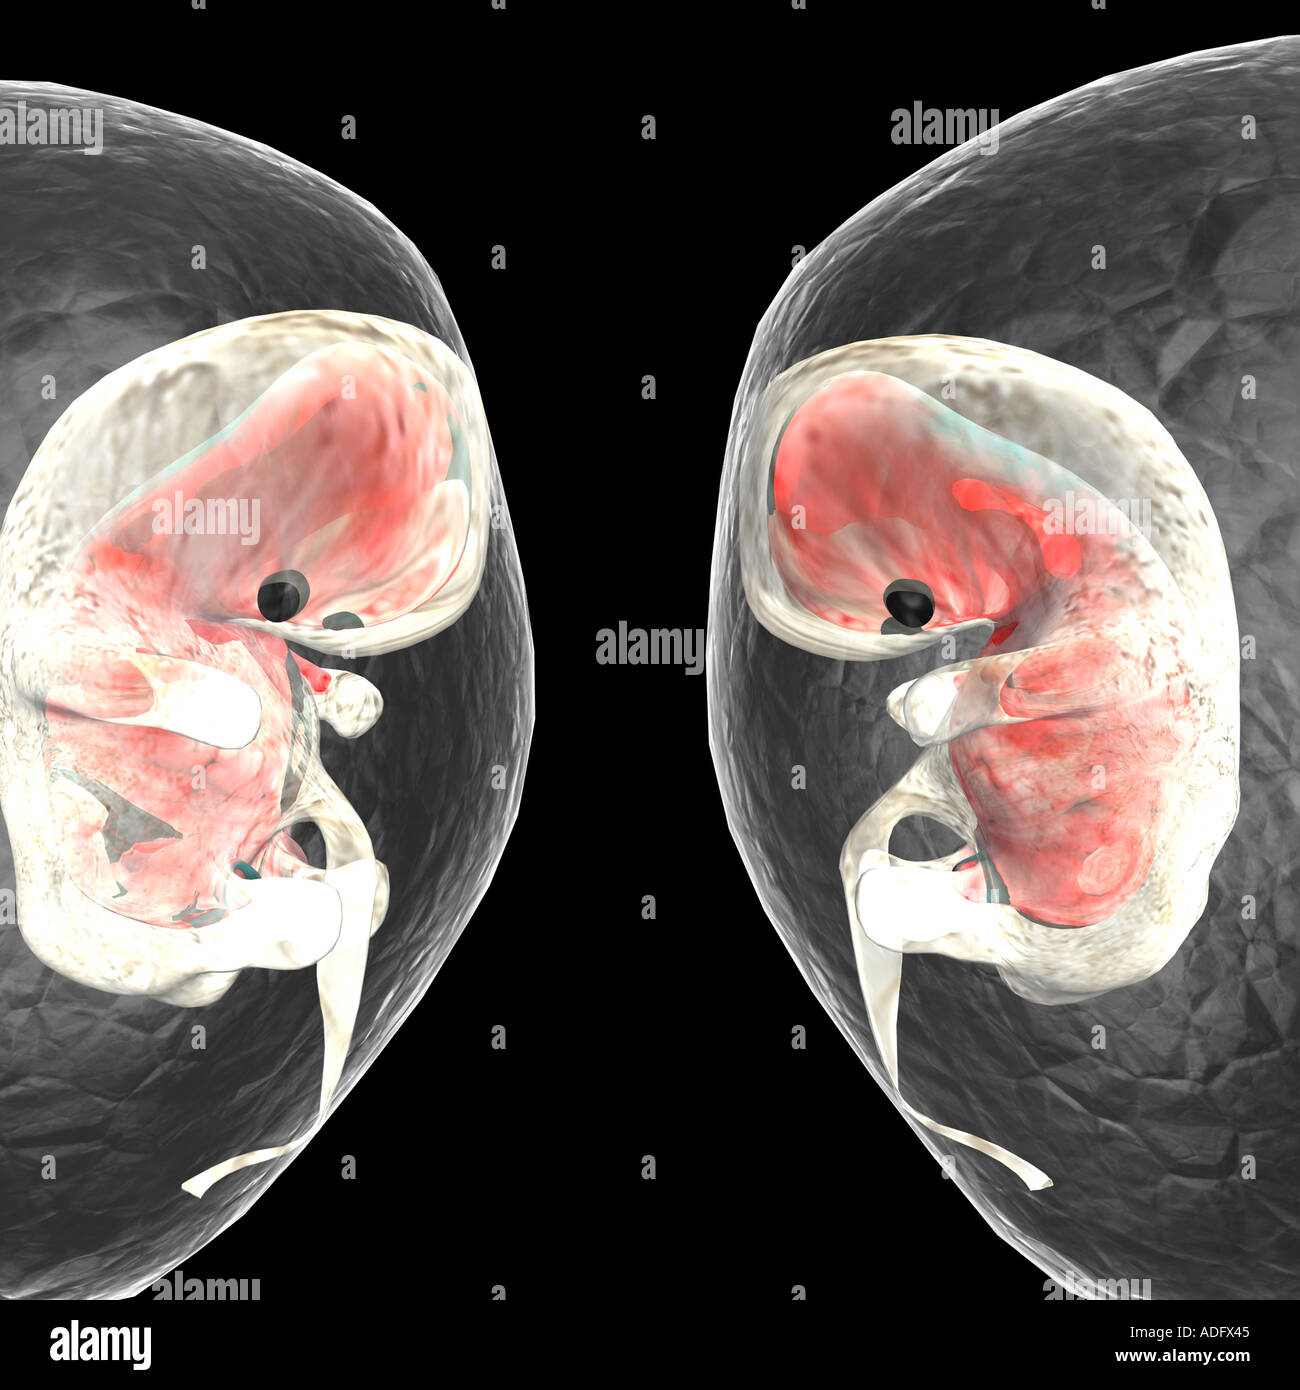 two identical human embryos human foetus reflected 3d computer illustration Stock Photo